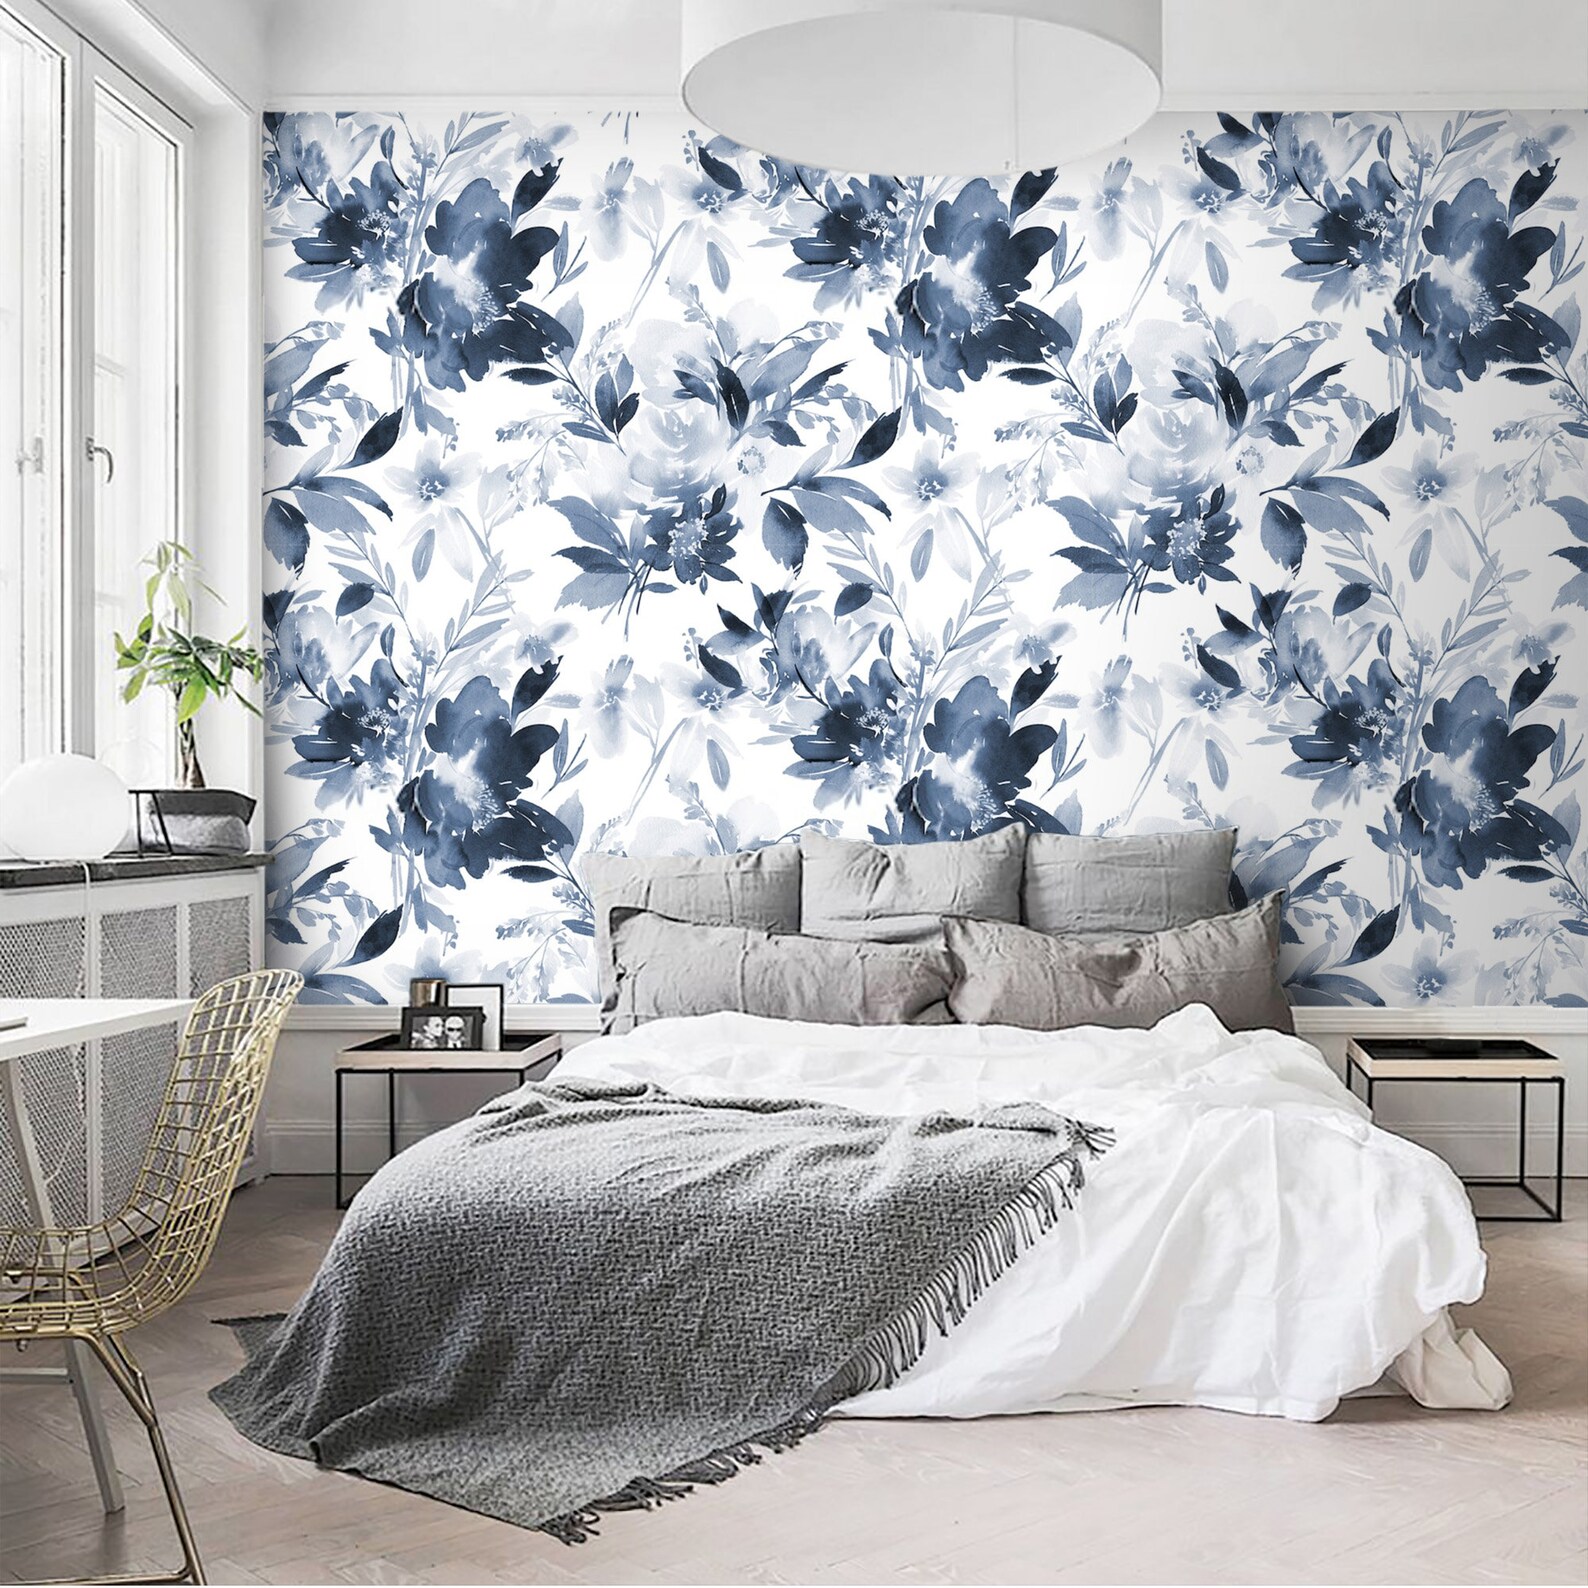 Wallpaper Floral Watercolor Blue White Flowers Wall Mural Self | Etsy